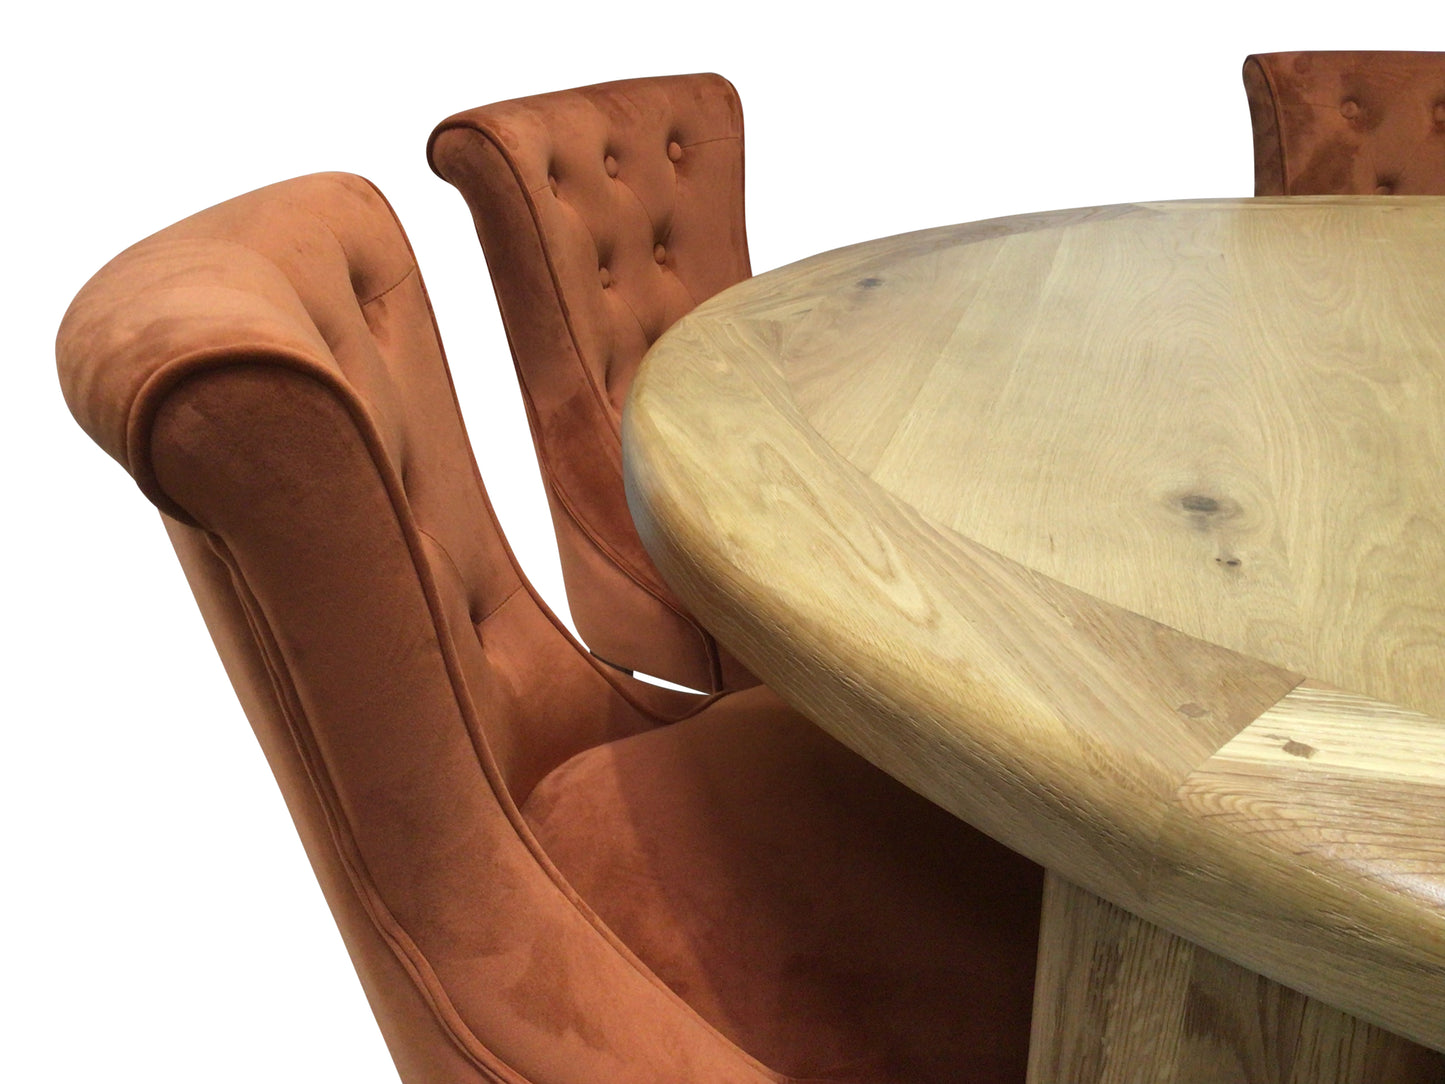 Danube Oak 1.5m Round Dining Set with Kingston Rust Dining Chairs